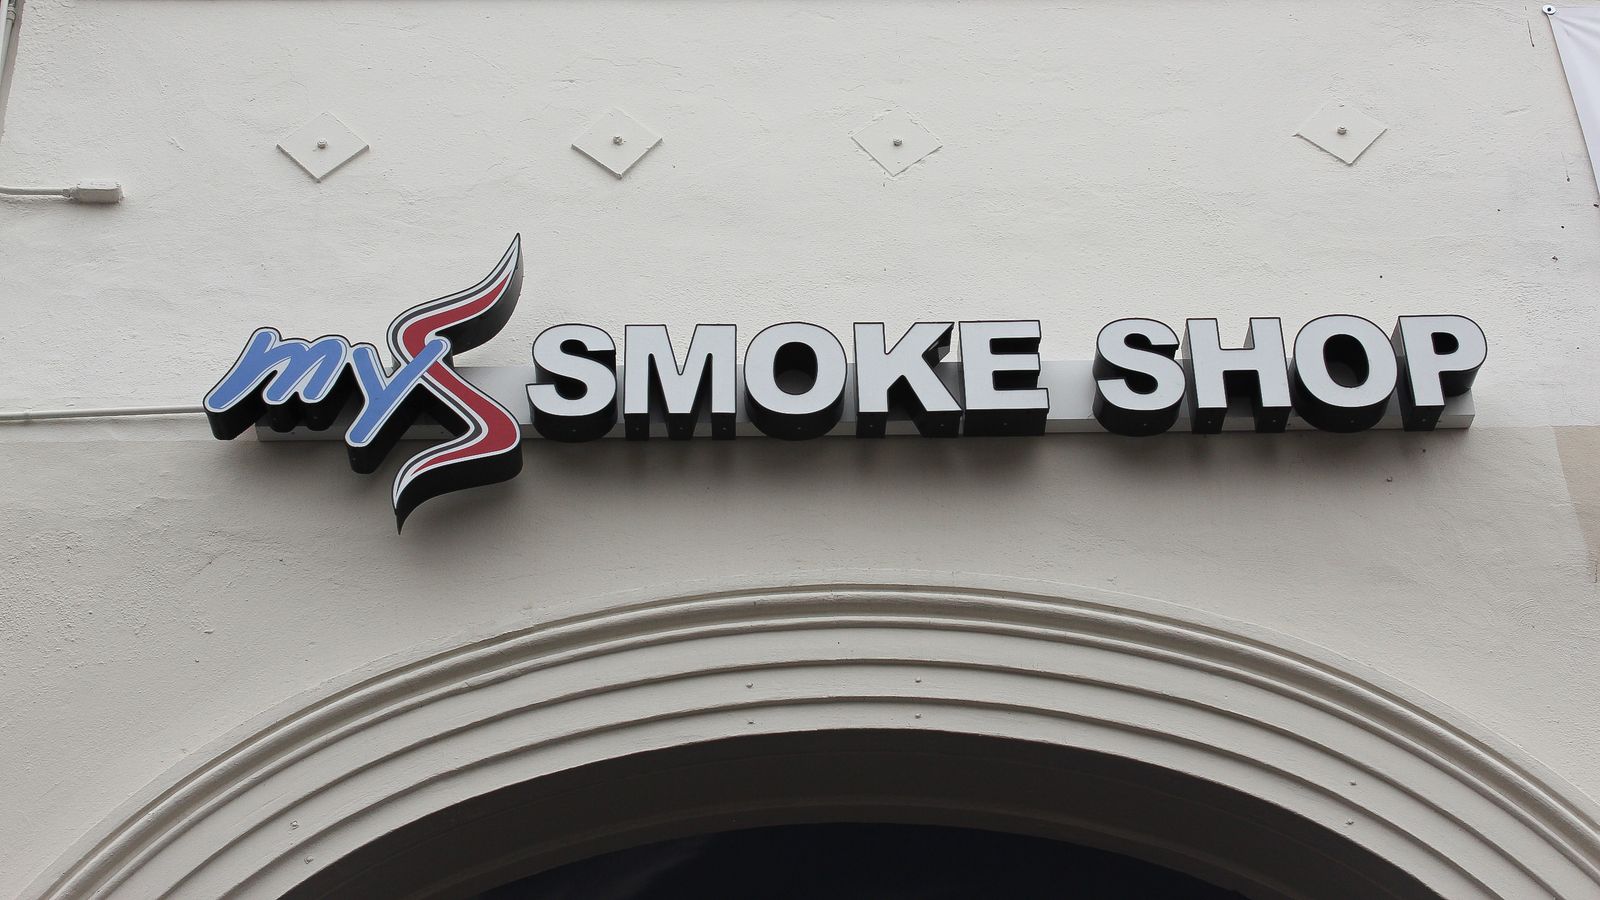 my smoke shop dimensional letters